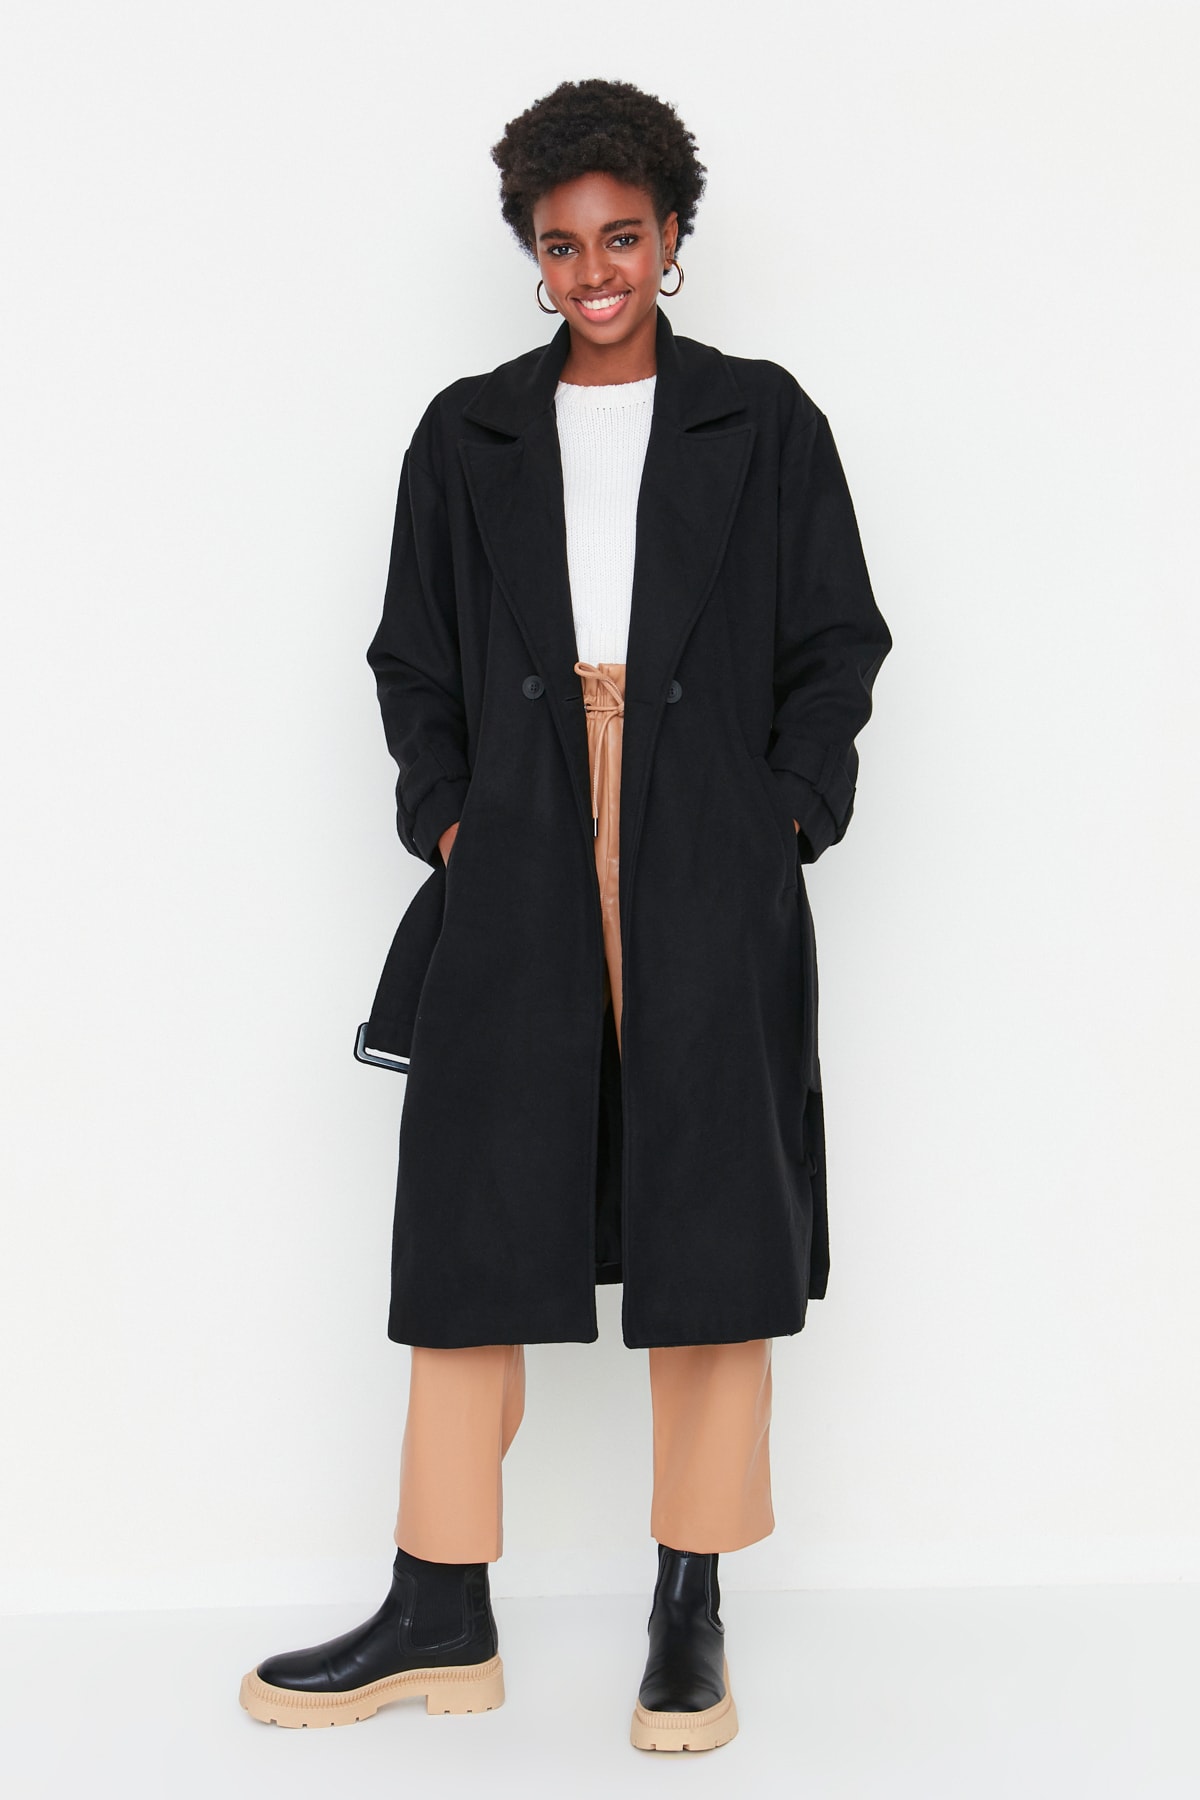 Trendyol Collection Coat - Black - Double-breasted